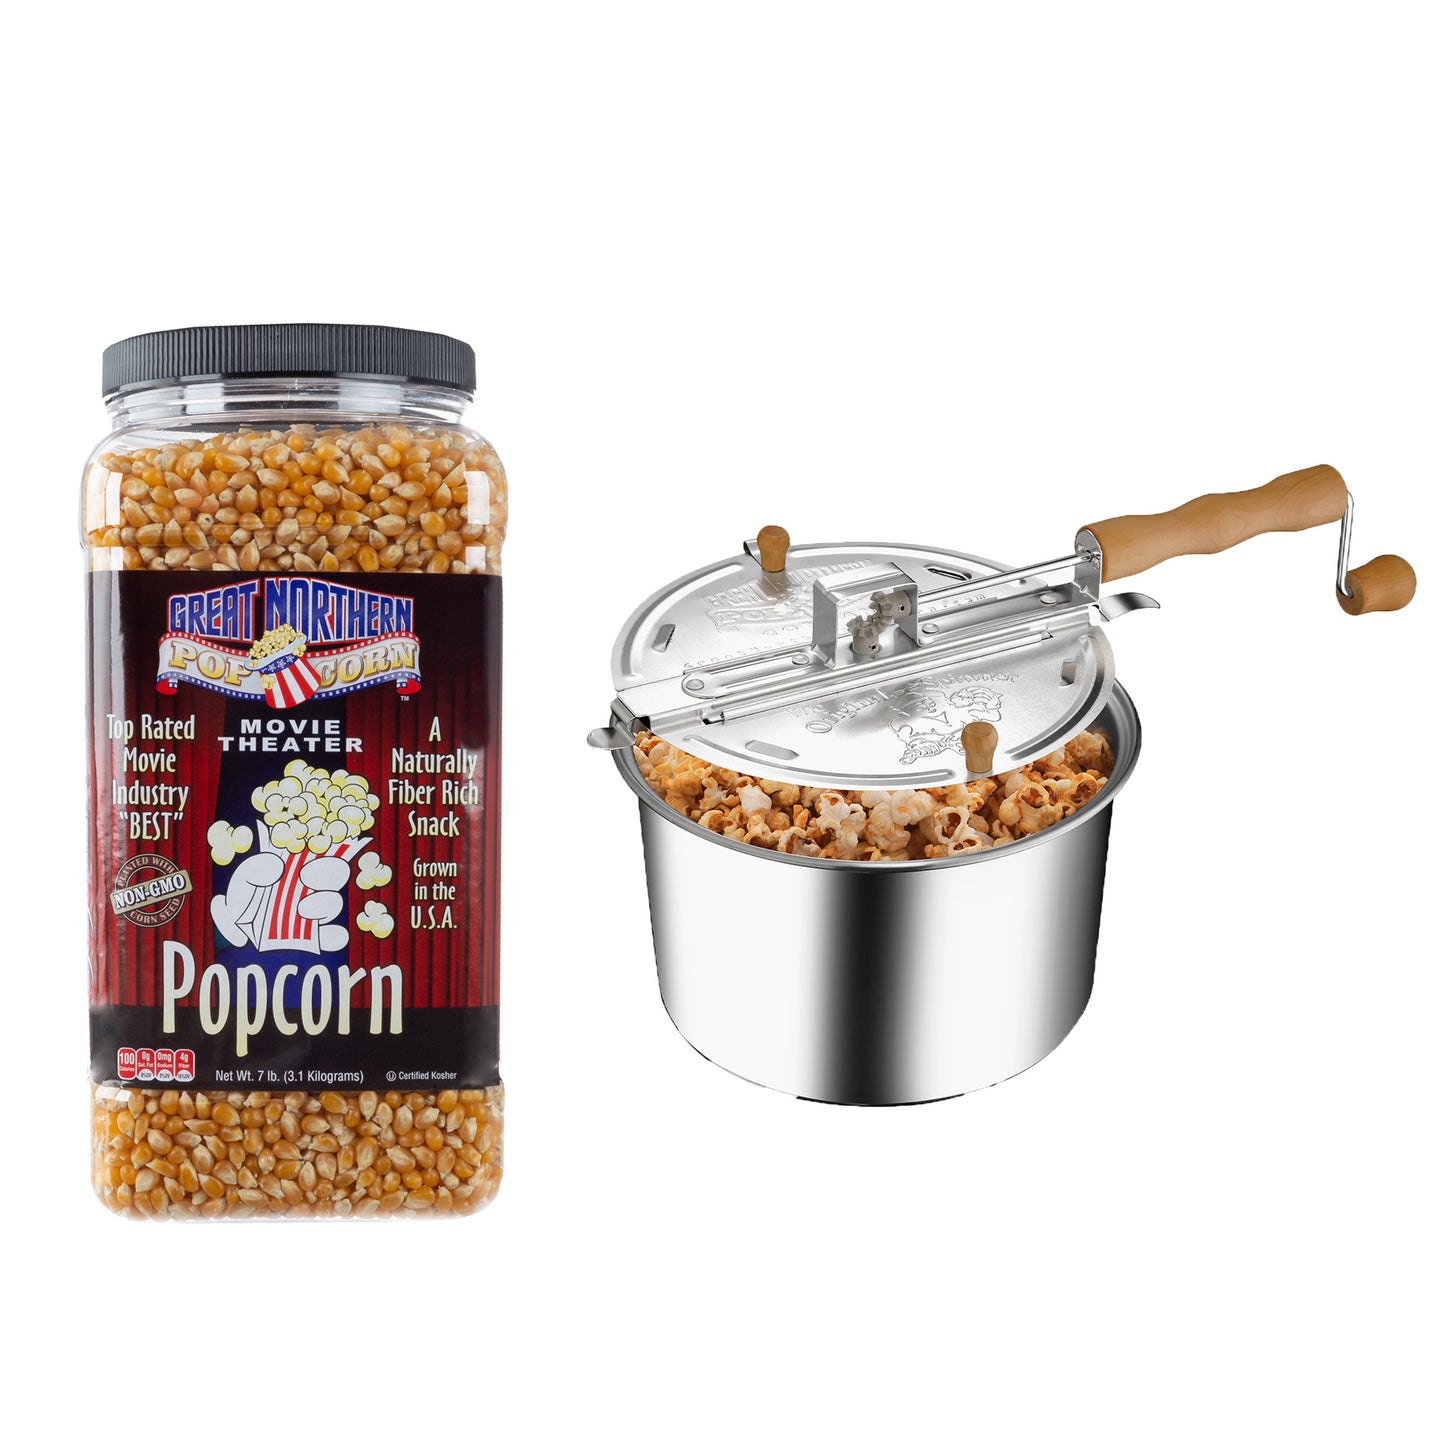 6.5 Quart Stainless Steel Stovetop Popcorn Maker with 7 Pounds of Popcorn Kernels